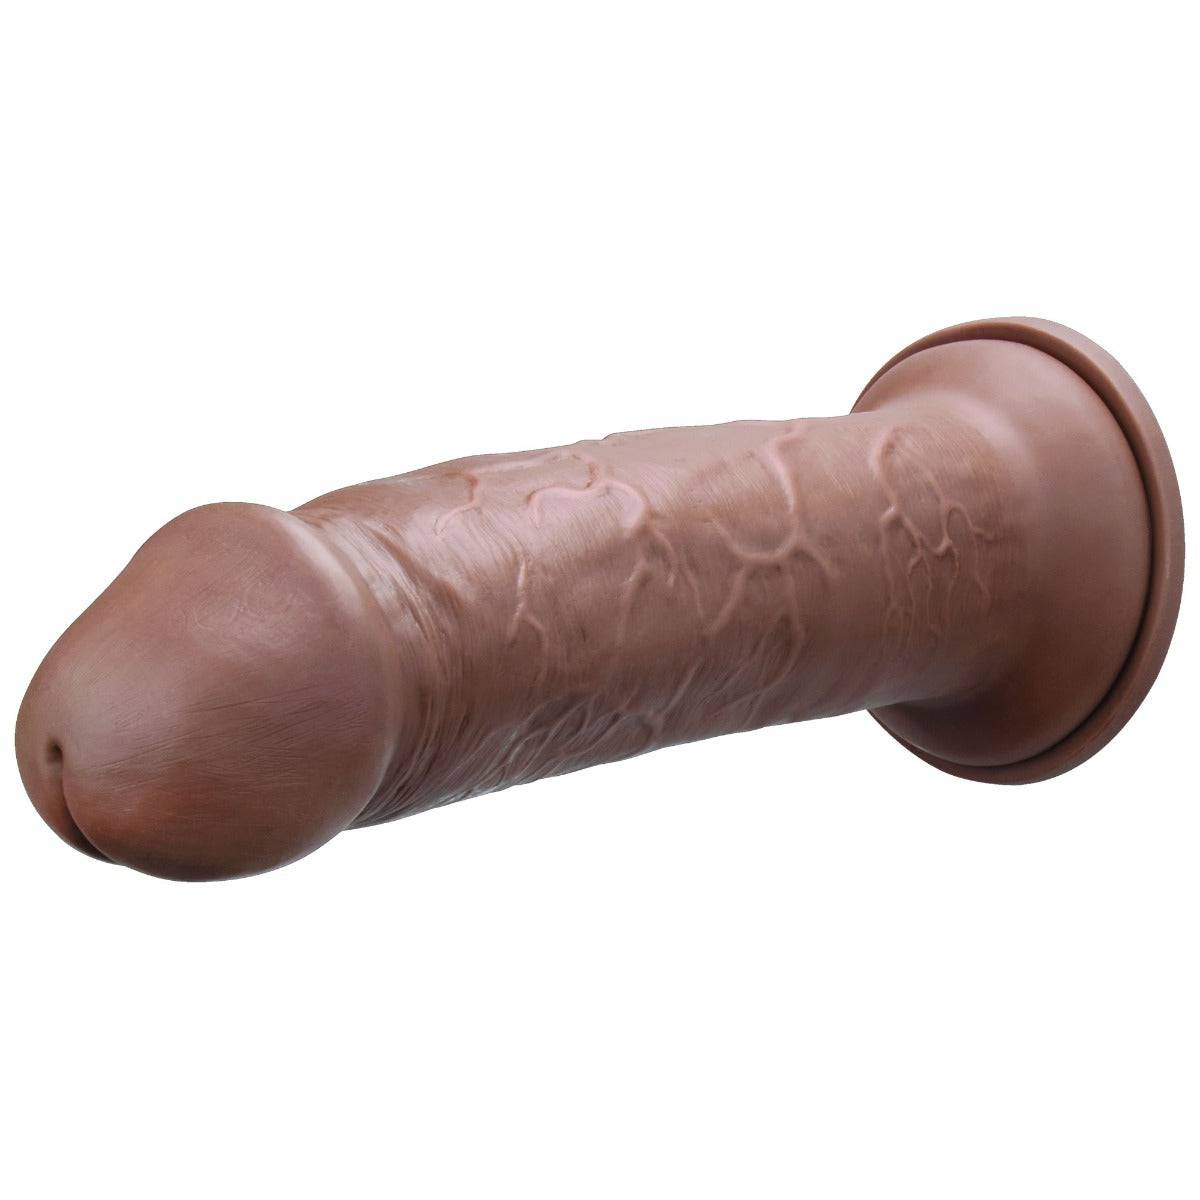 Front View Product - Me You Us Ultra Cock Caramel Realistic Dildo 12 Inch - Simply Pleasure